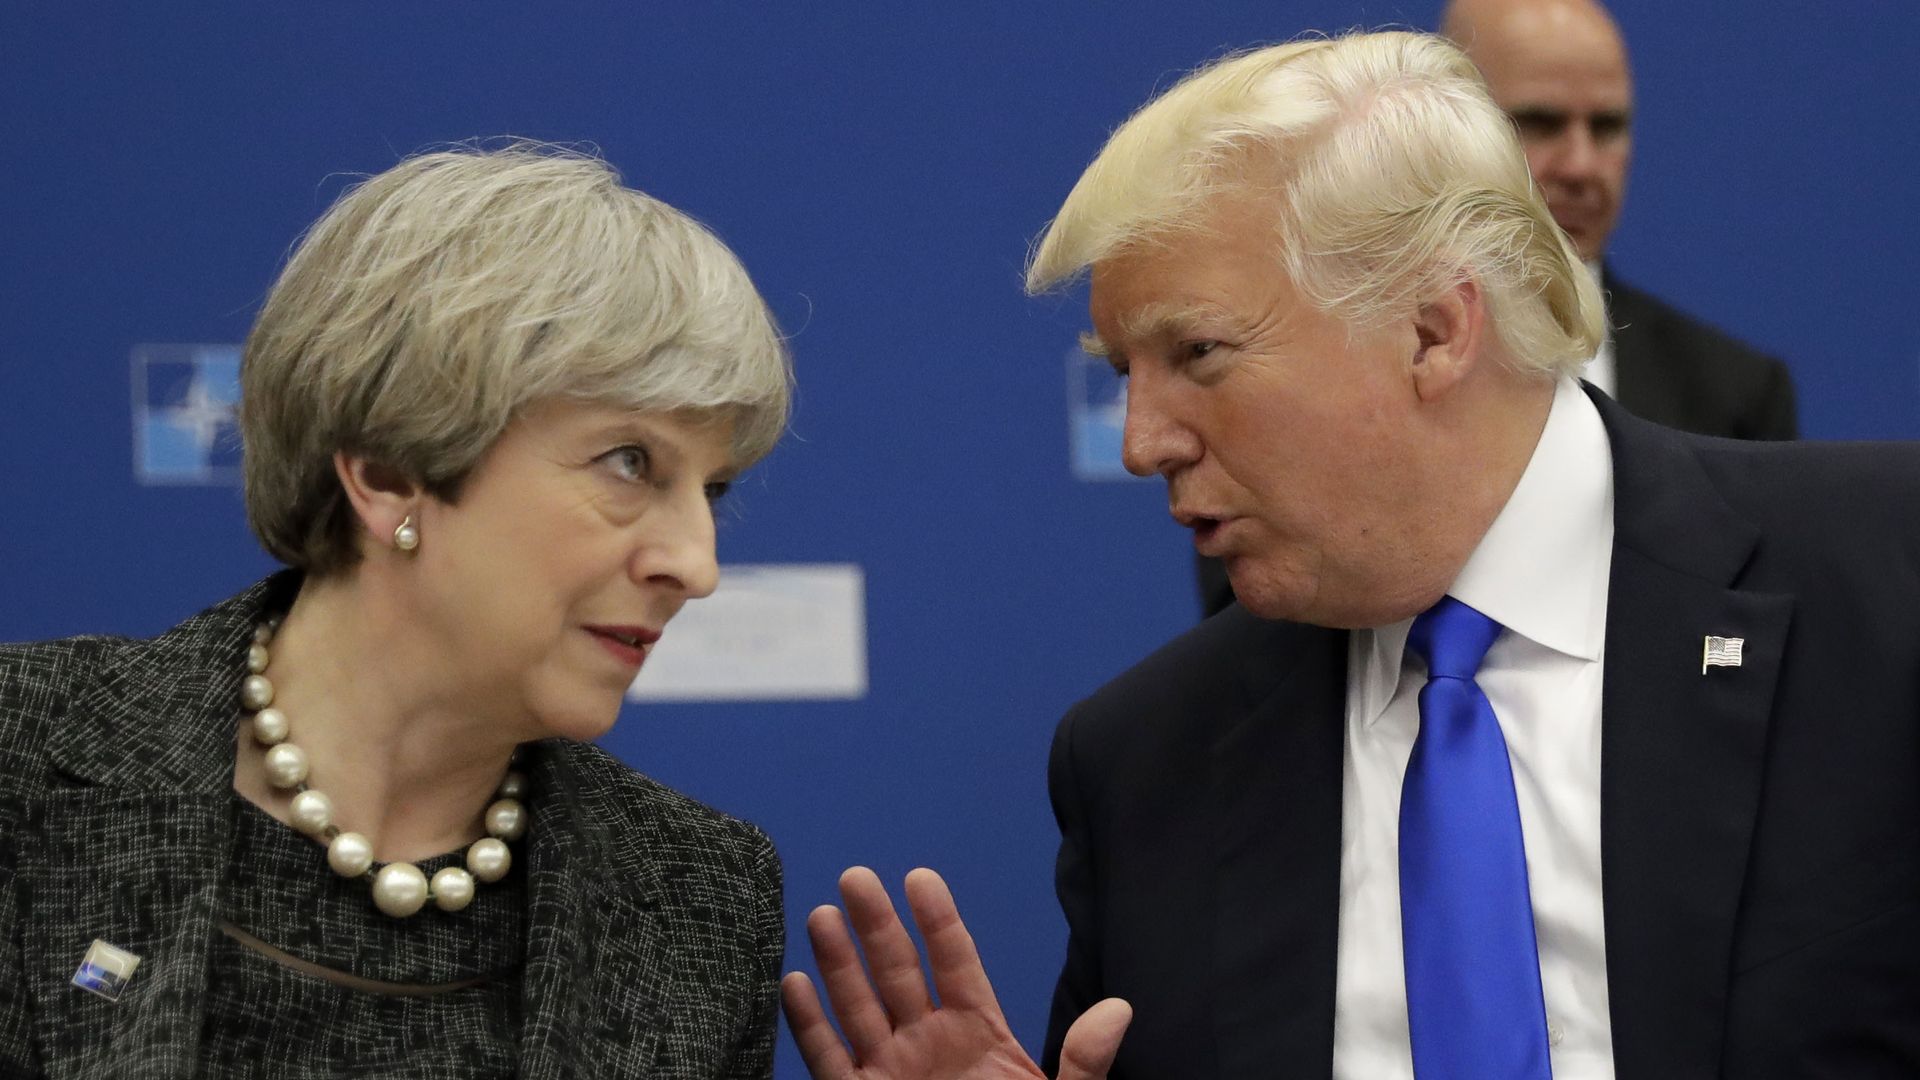  Trump leans over to speak to Theresa May during in a working dinner meeting at NATO HQ 